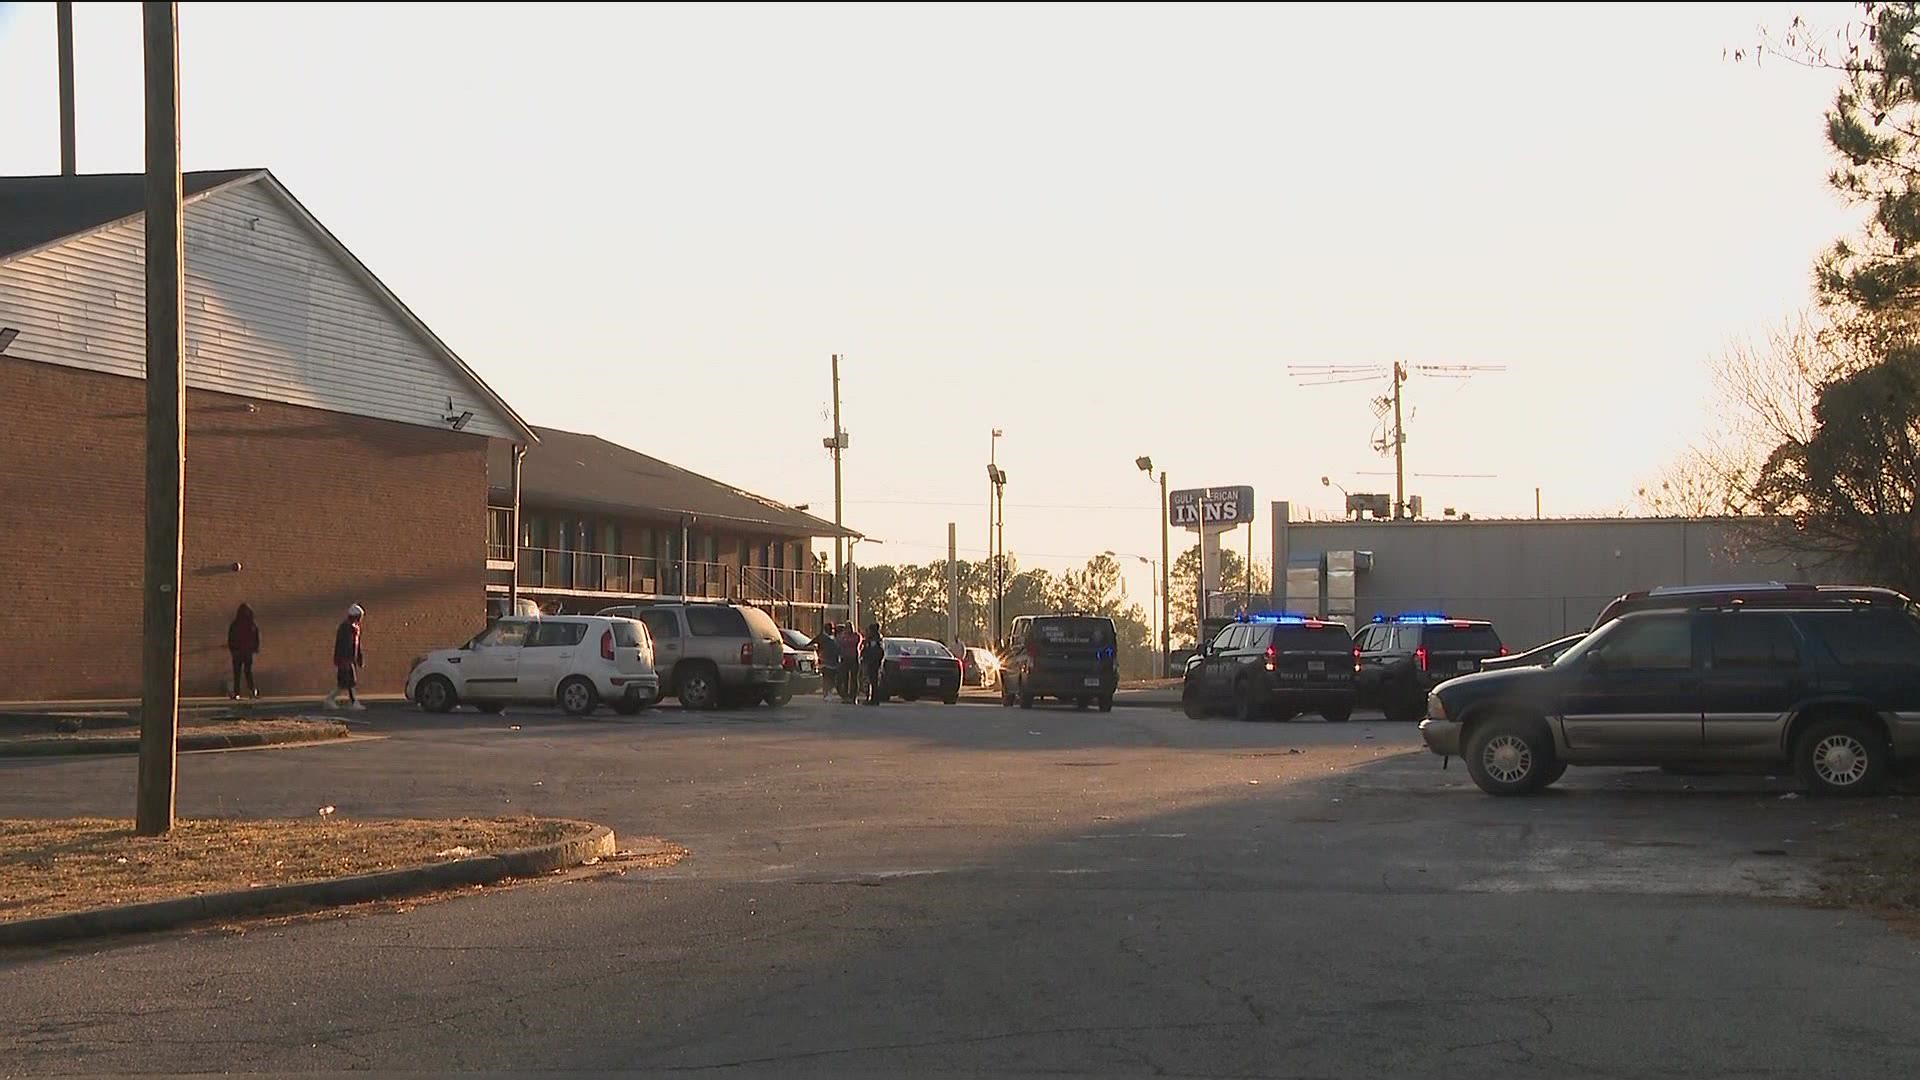 Authorities said it happened at the Budgetel Inn & Suites along Gus Place in Decatur.